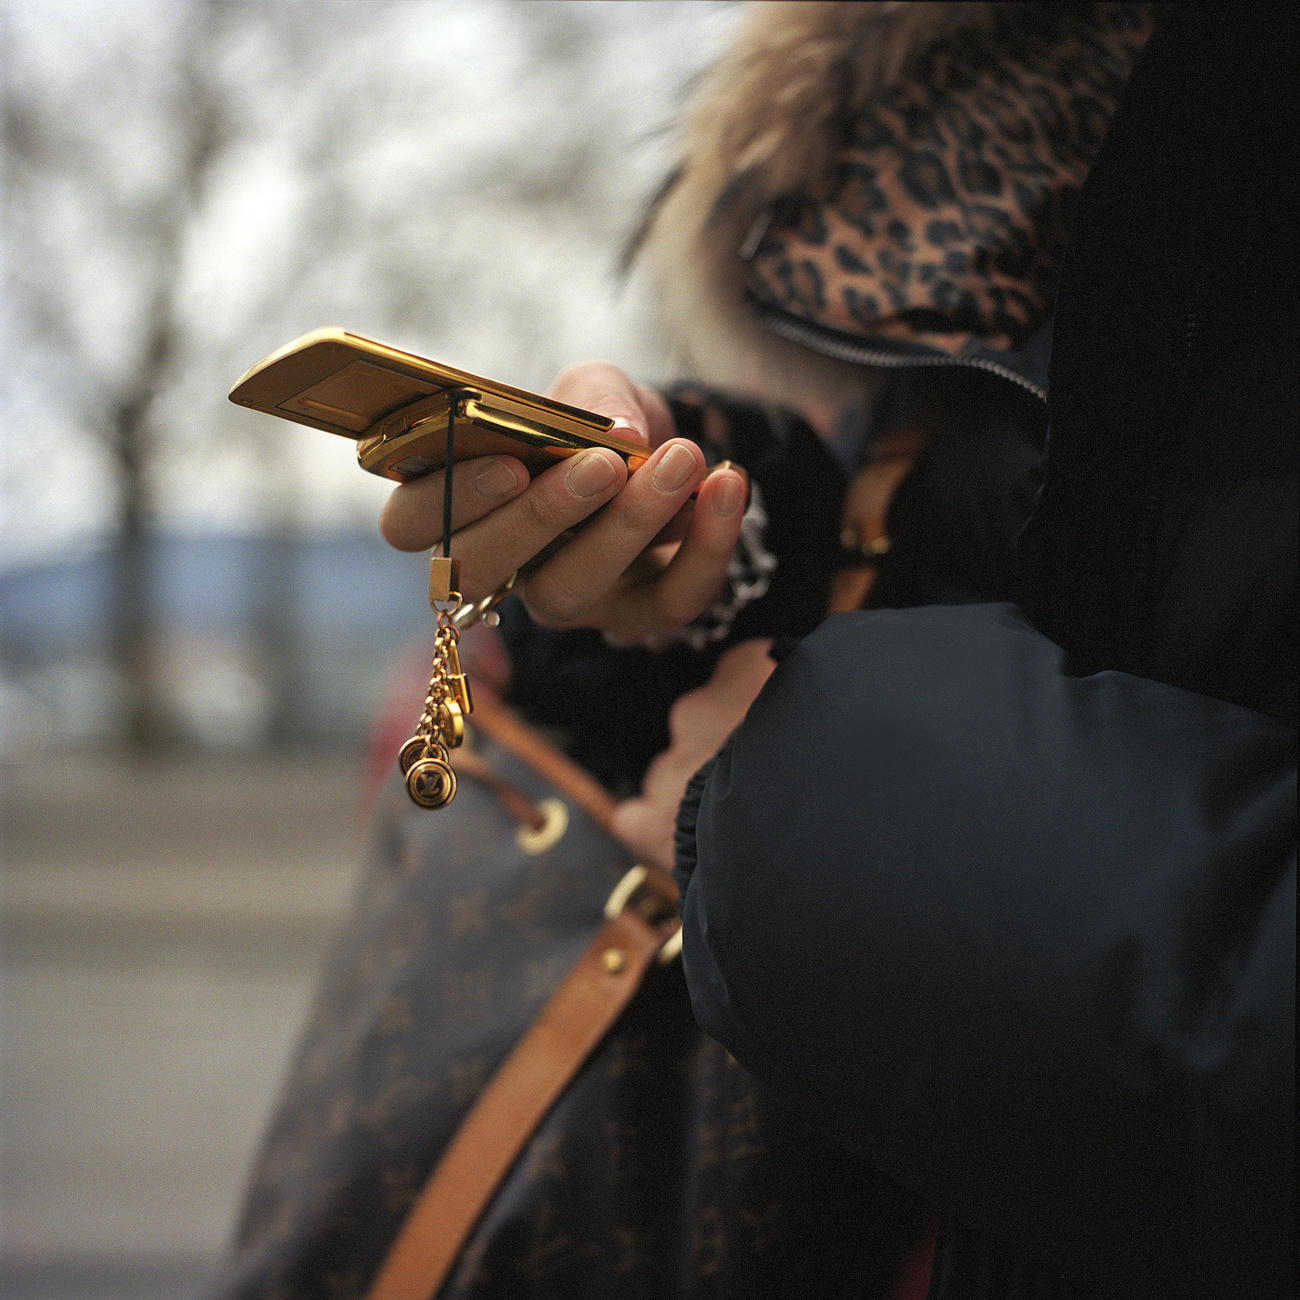 Woman hold gold mobile phone